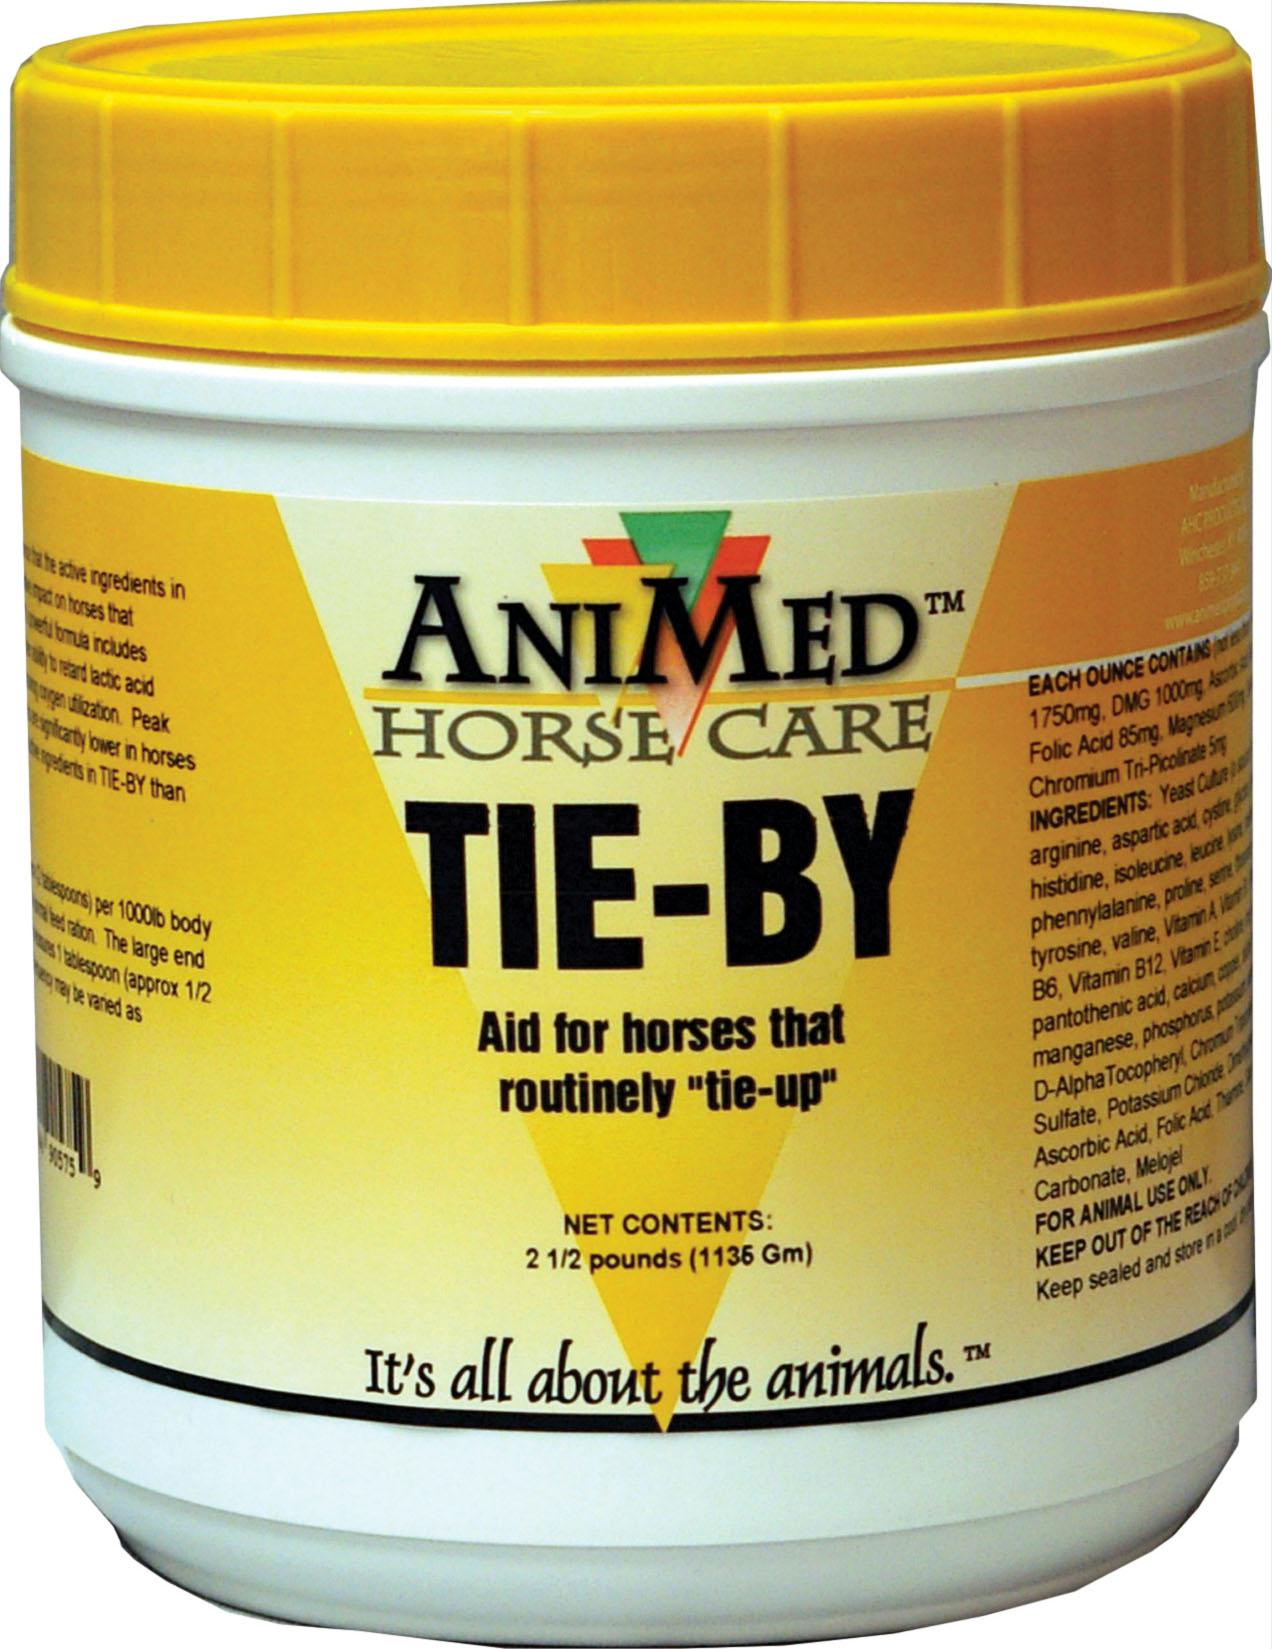 Tie-by Tie-up Aid For Horses - aomega-products